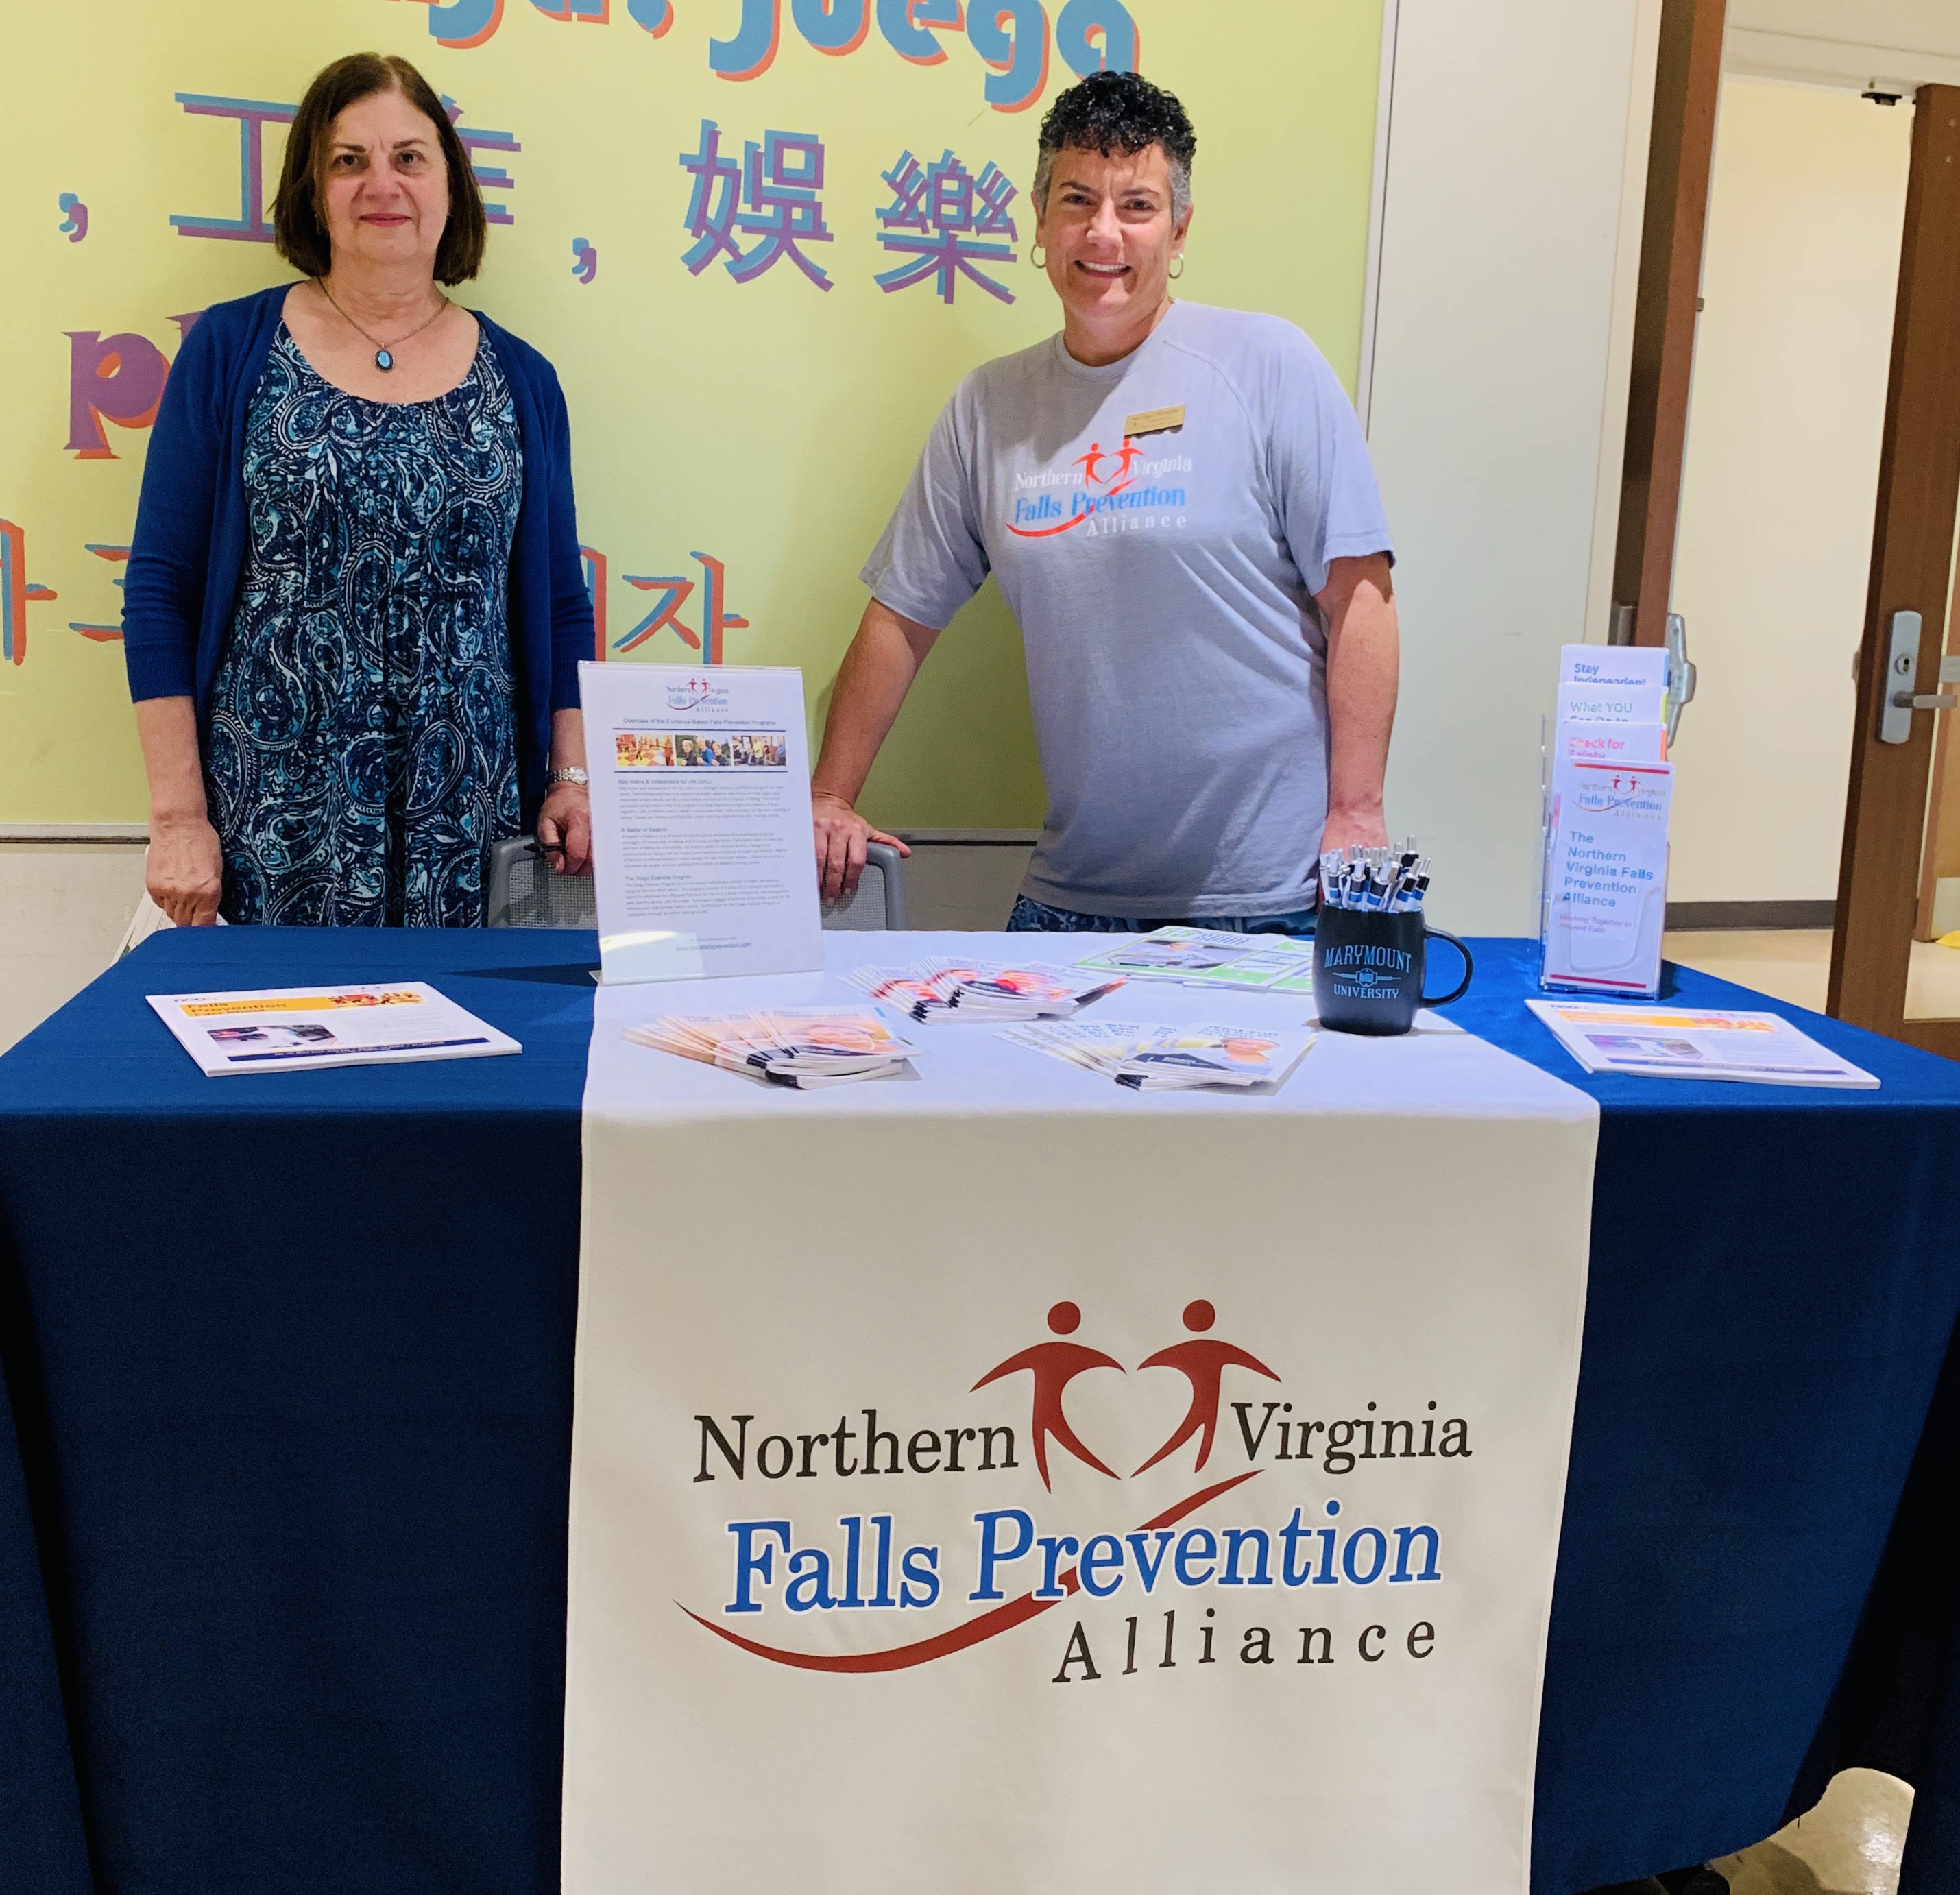 Northern Virginia Falls Prevention Alliance information table